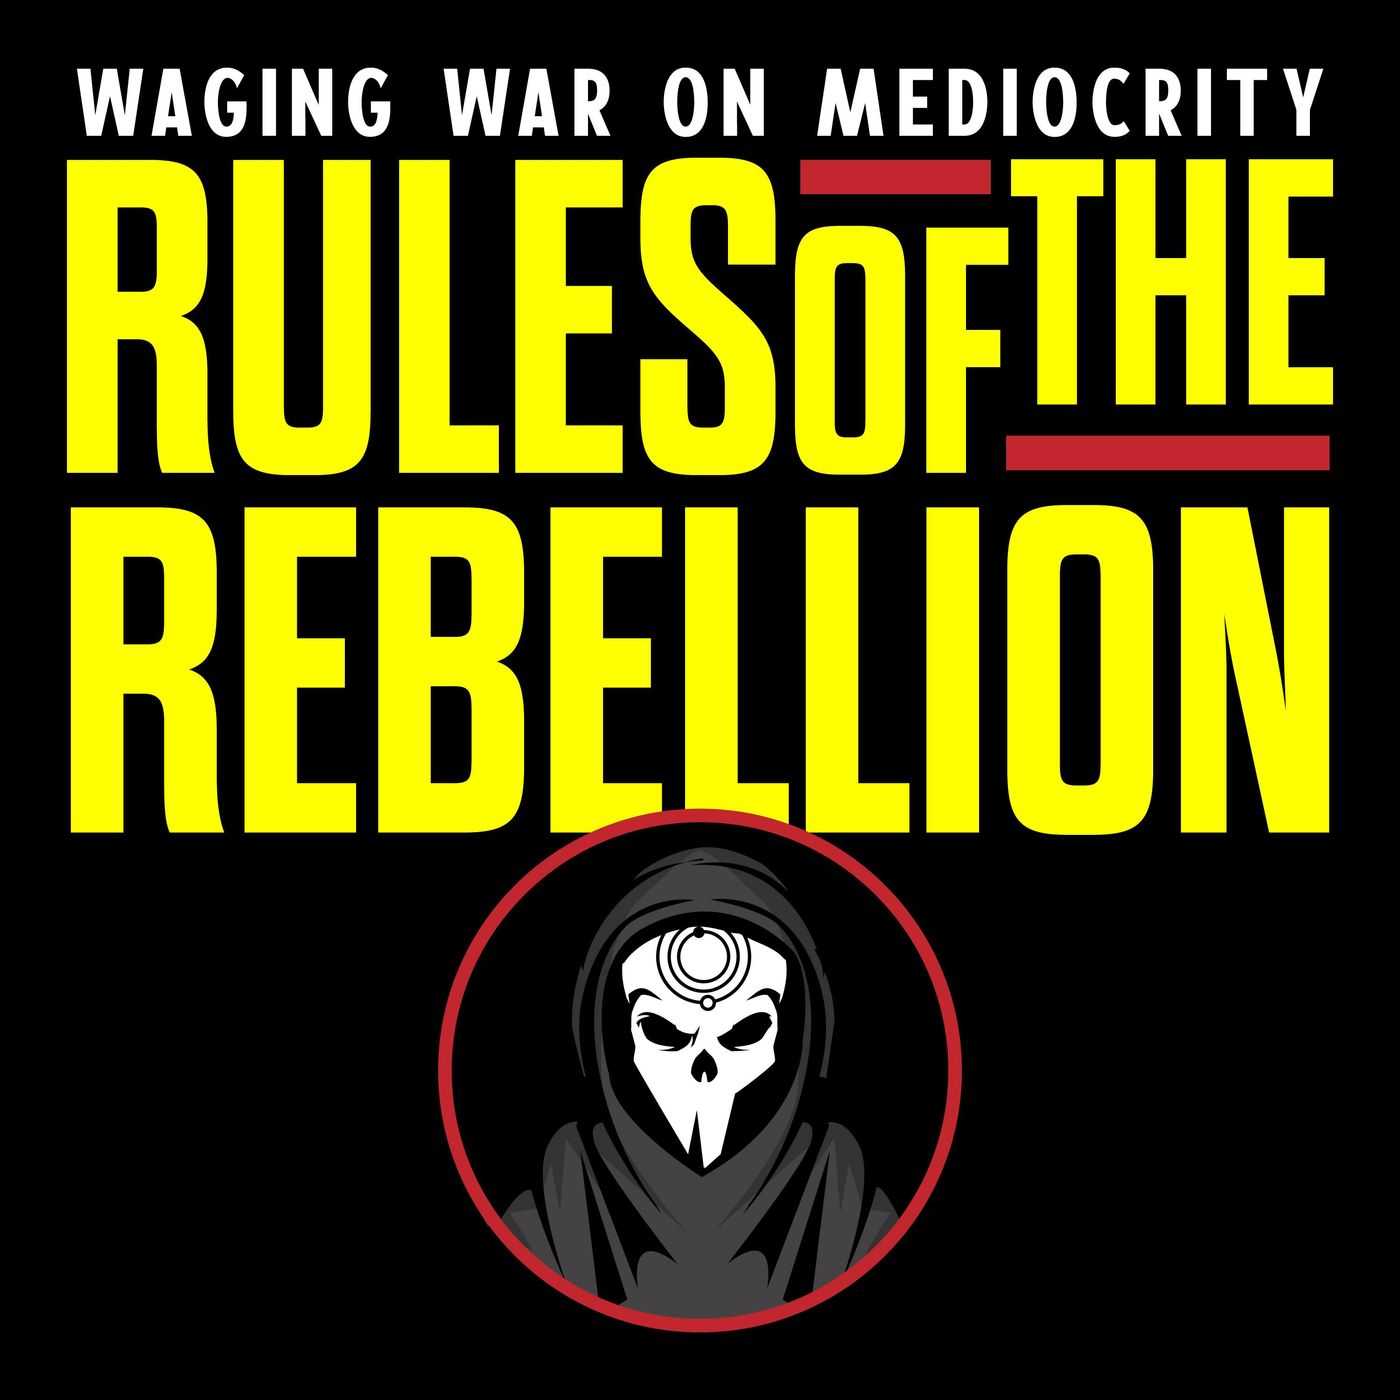 rules-of-the-rebellion-education-podcast-podchaser